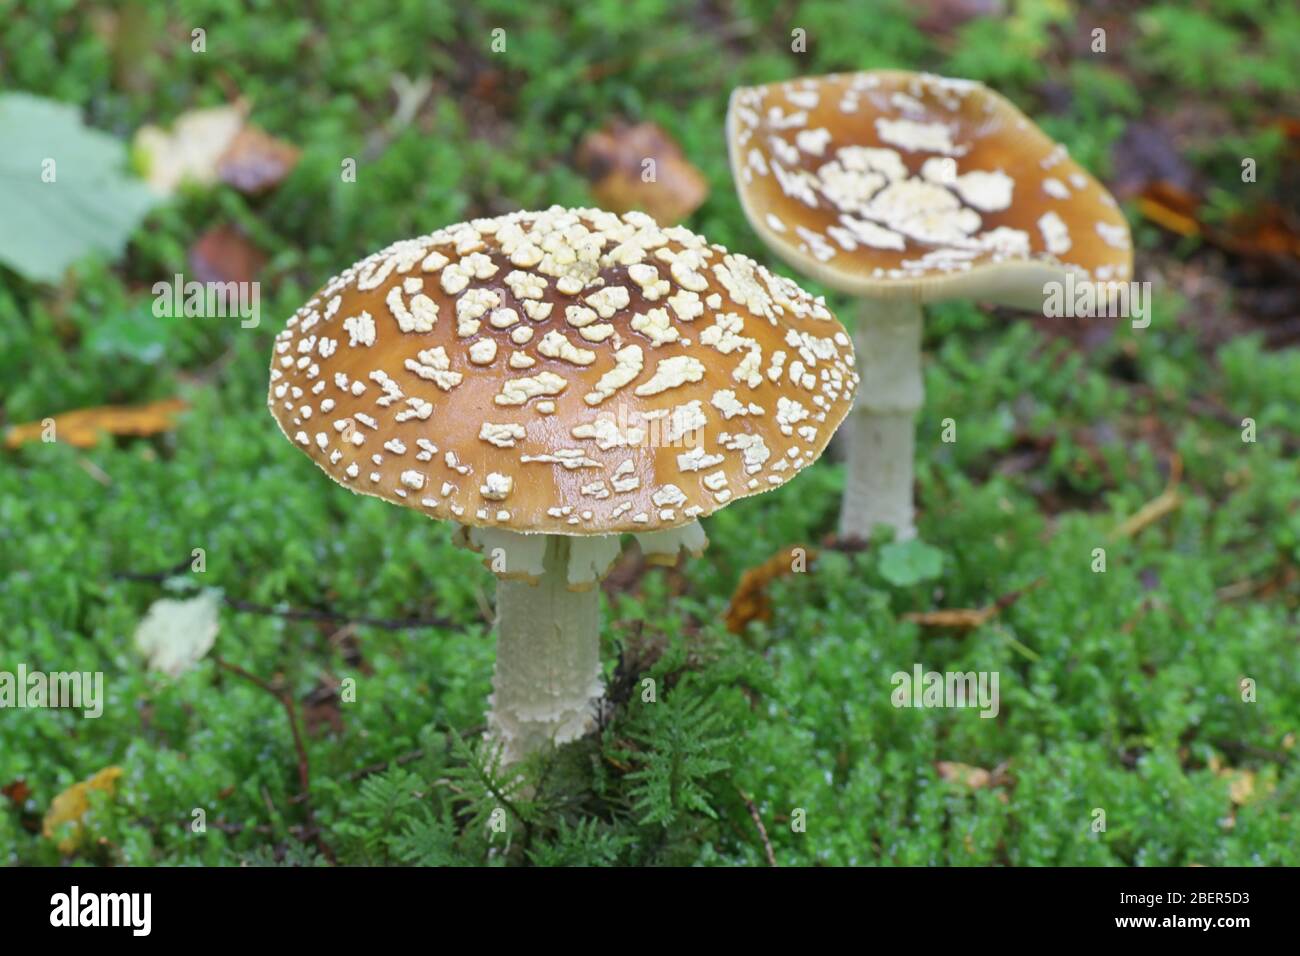 Amanita muscaria, known as the fly agaric or fly amanita, a poisonous toadstool from Finland Stock Photo